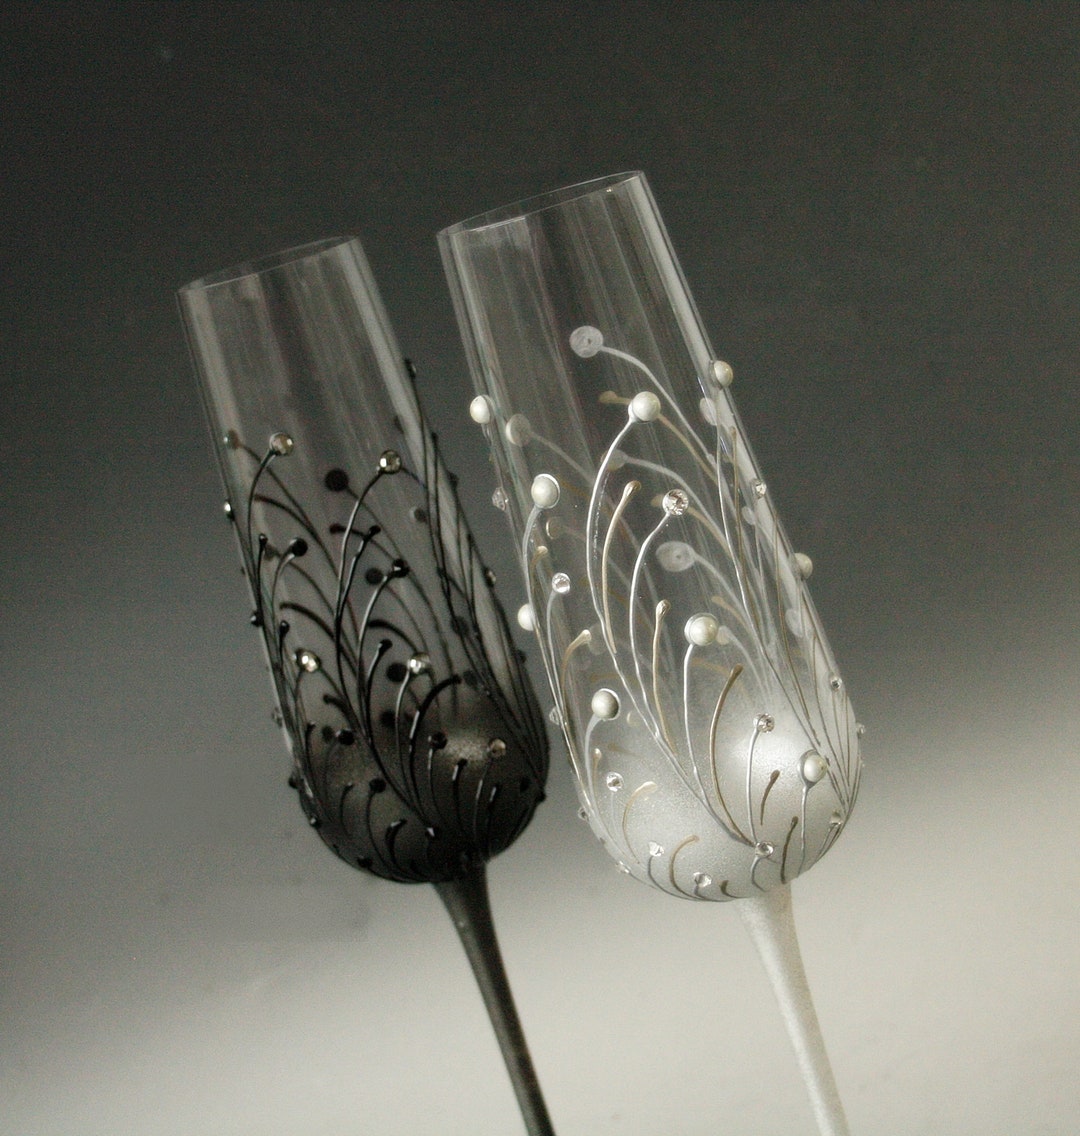 Mr and Mrs Wedding Champagne Glasses Silver White and Graphite Black ,  Pearls, Hand-painted Set of 2 